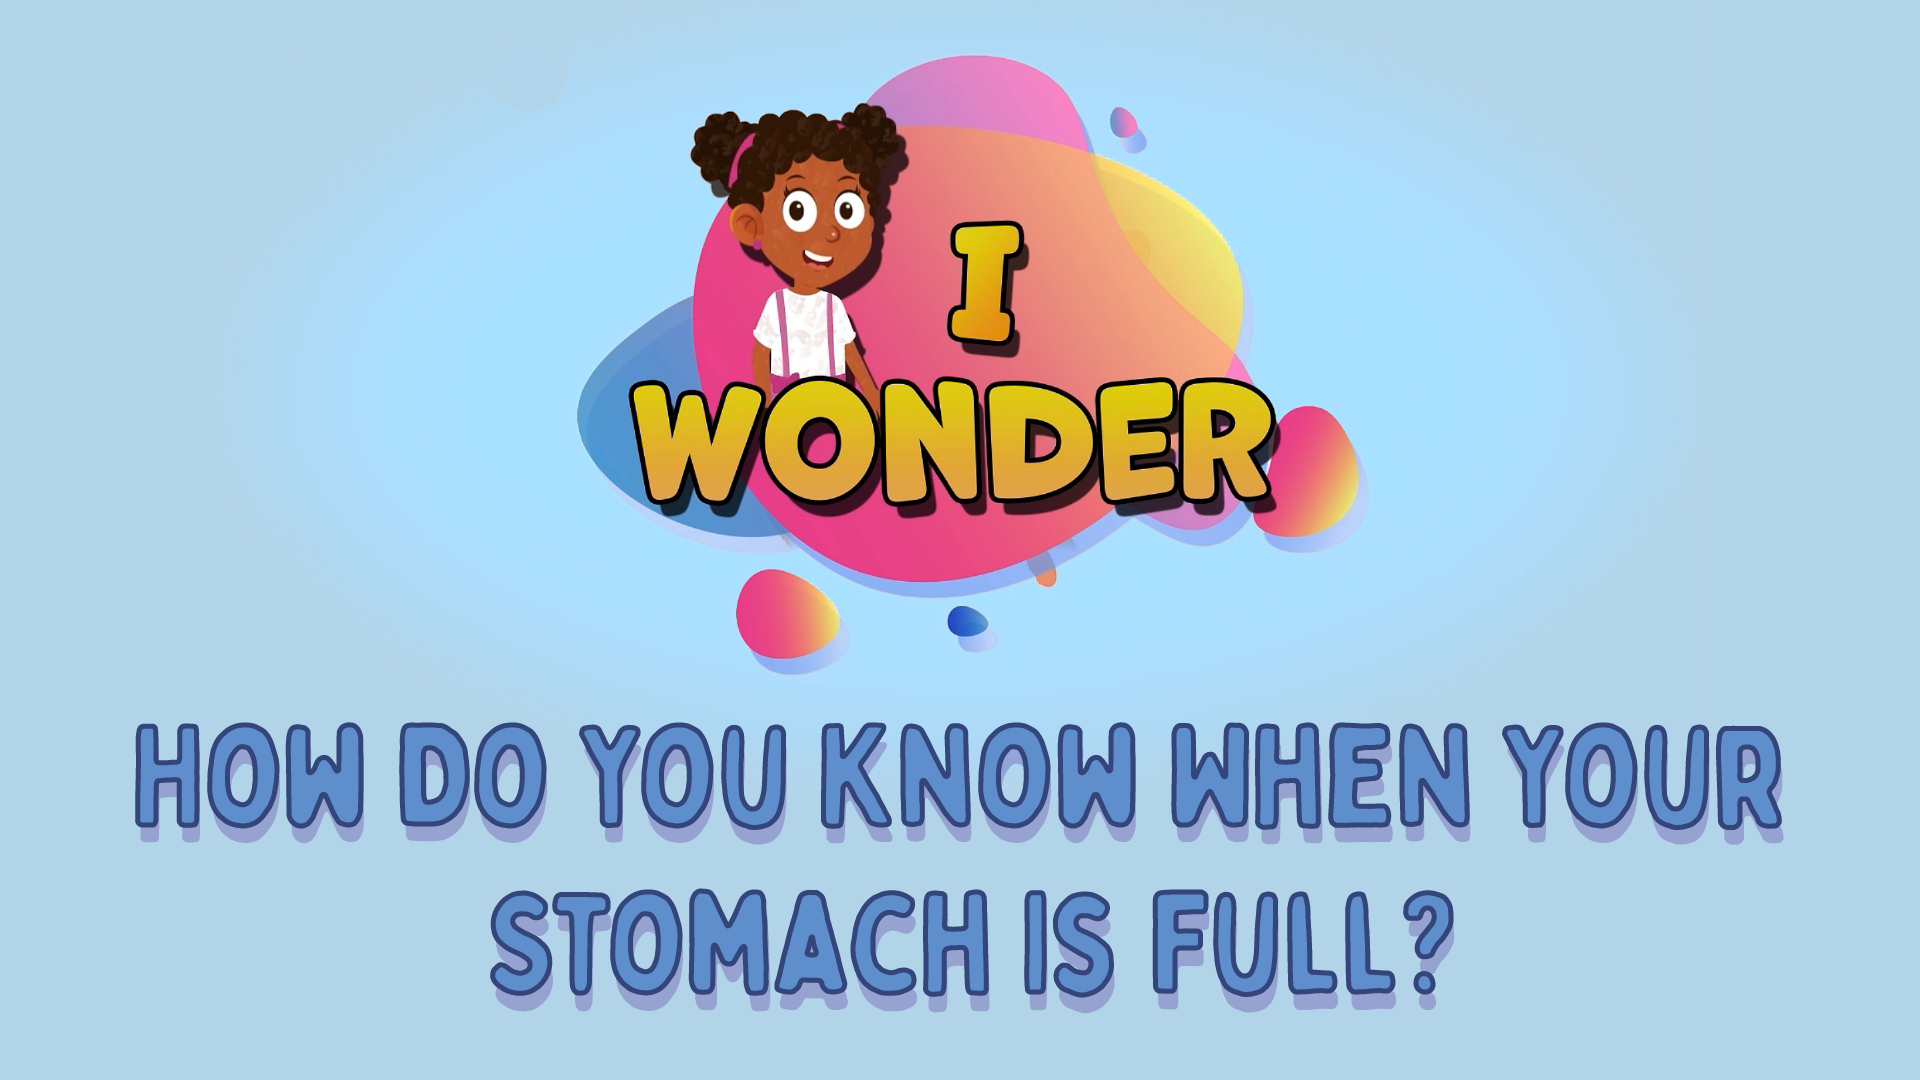 How Do You Know When Your Stomach Is Full?